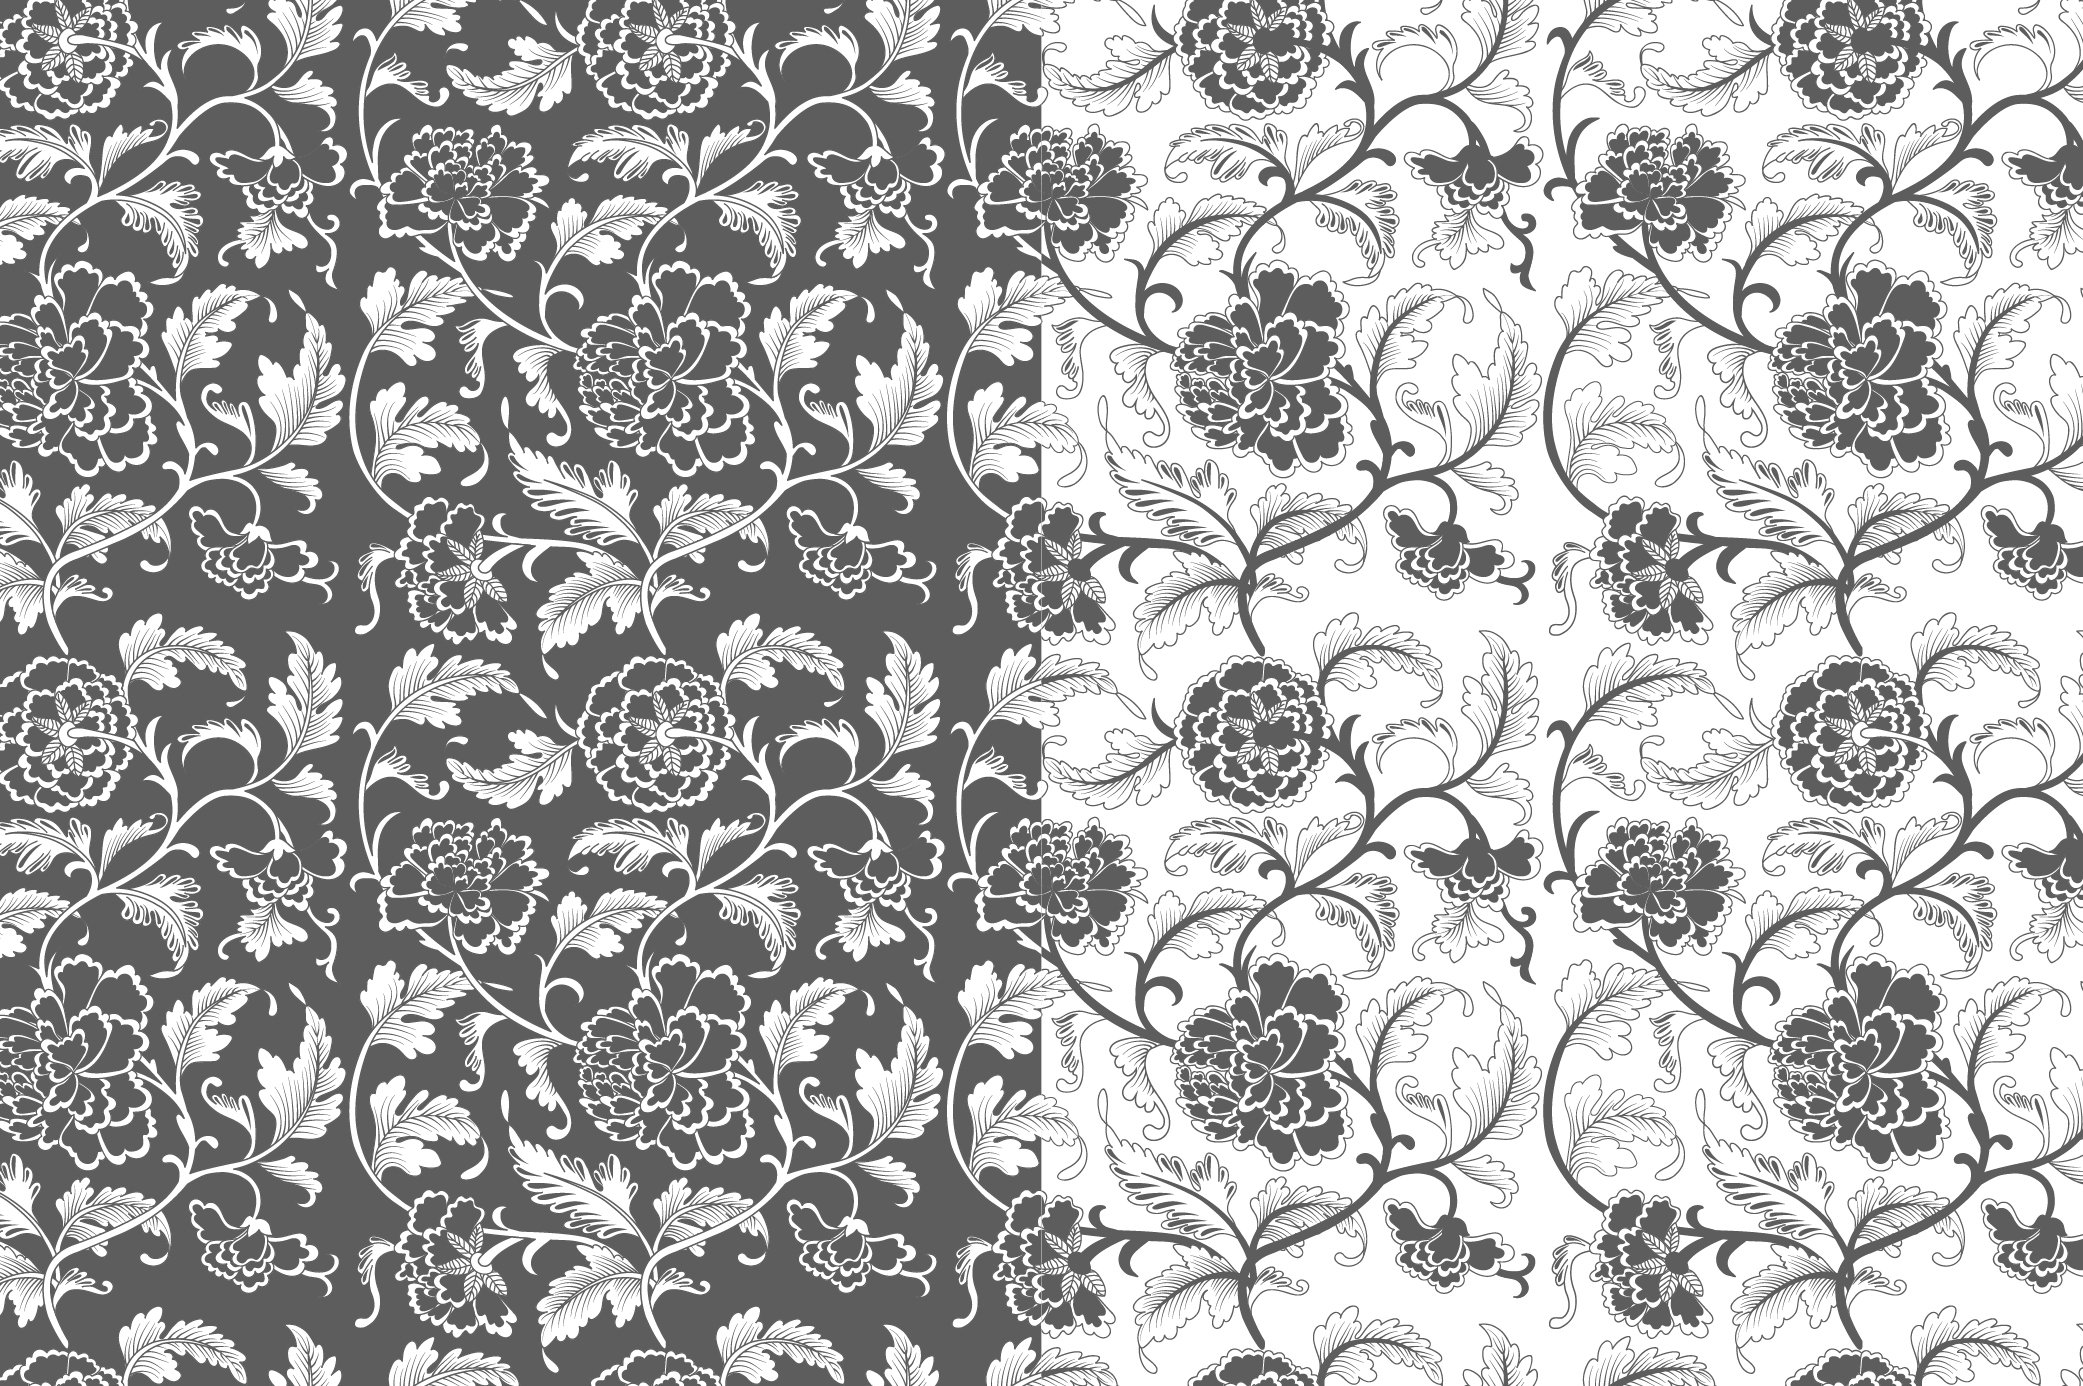 A black and white floral wallpaper pattern.